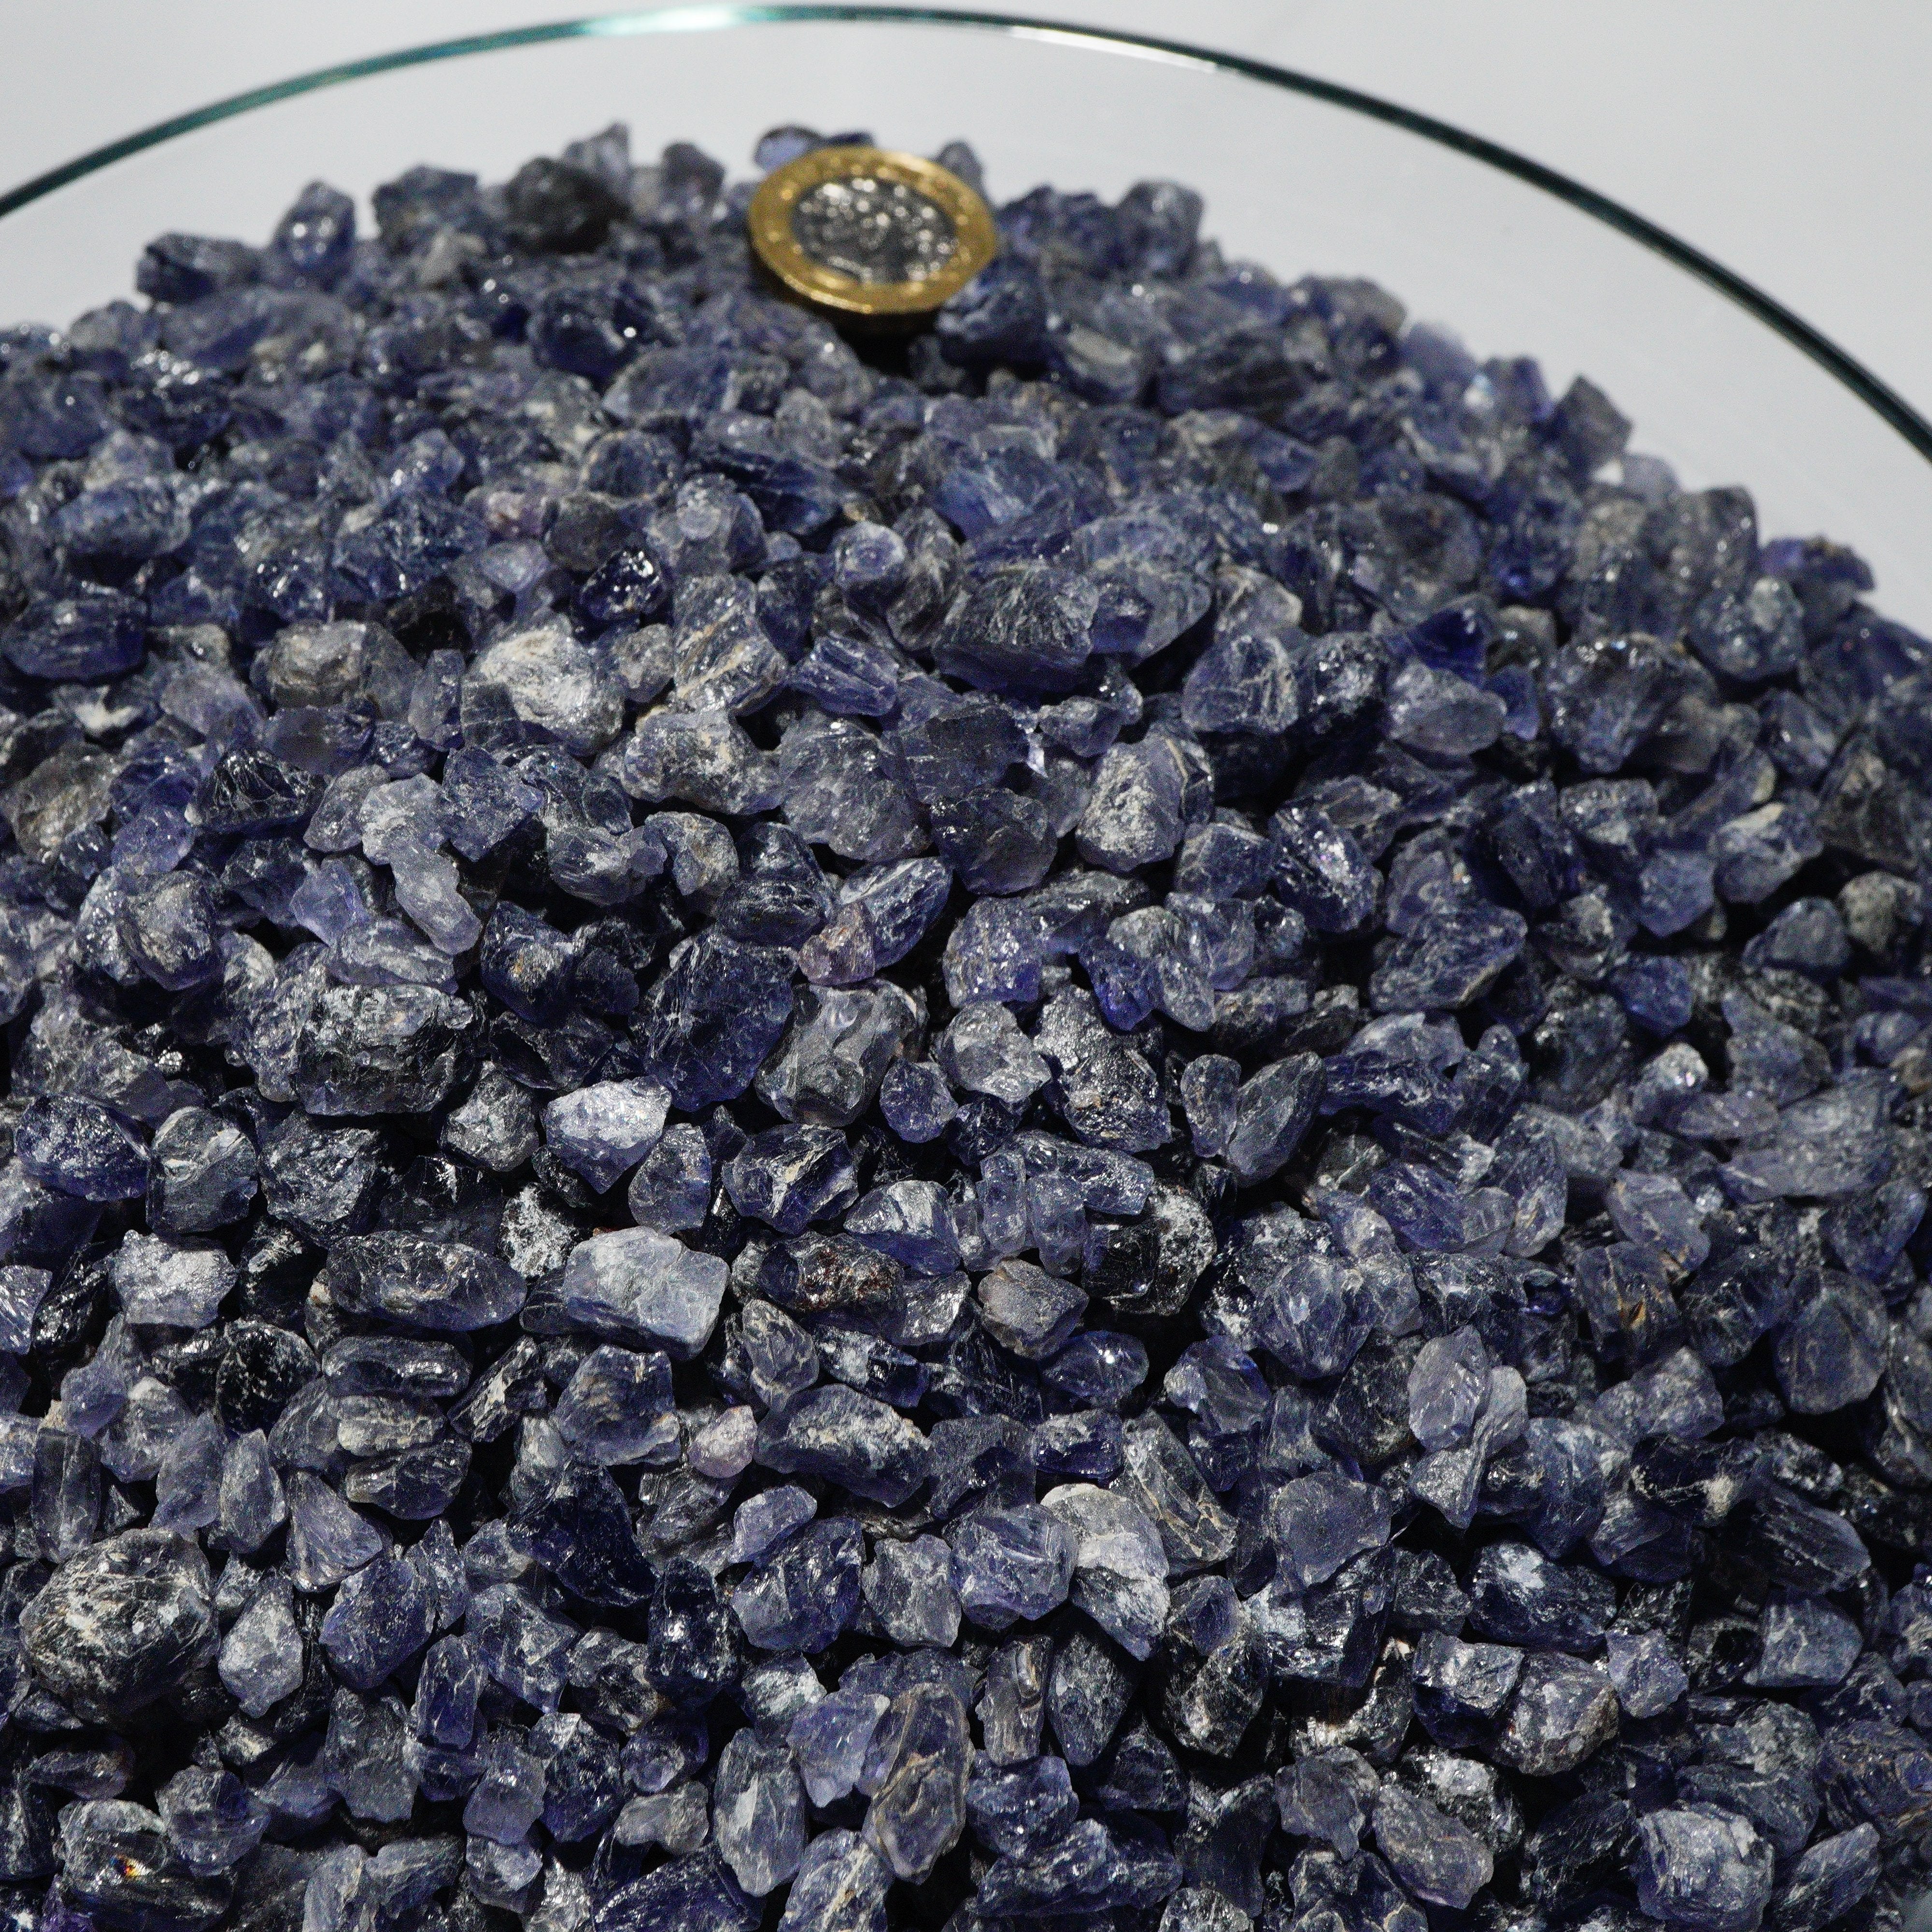 5049Gm {5Kg} Wholesale Lot Iolite From Tanzania 0.20Gm-2.00Gm Some Crystals Too..